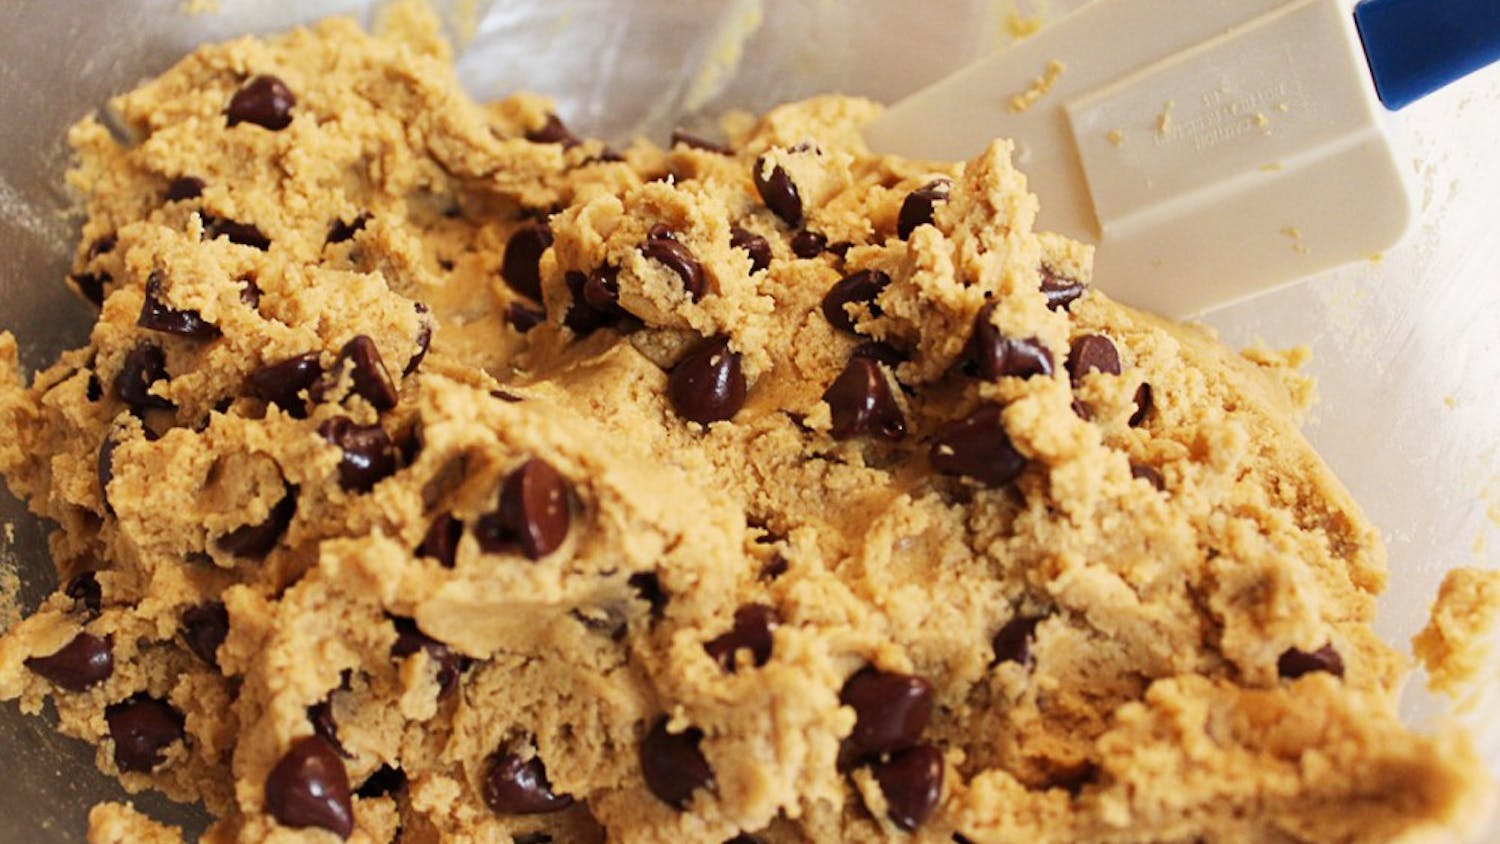 Salted chocolate chip cookies can be made with tahini, a sesame paste often used in Middle Eastern dishes.